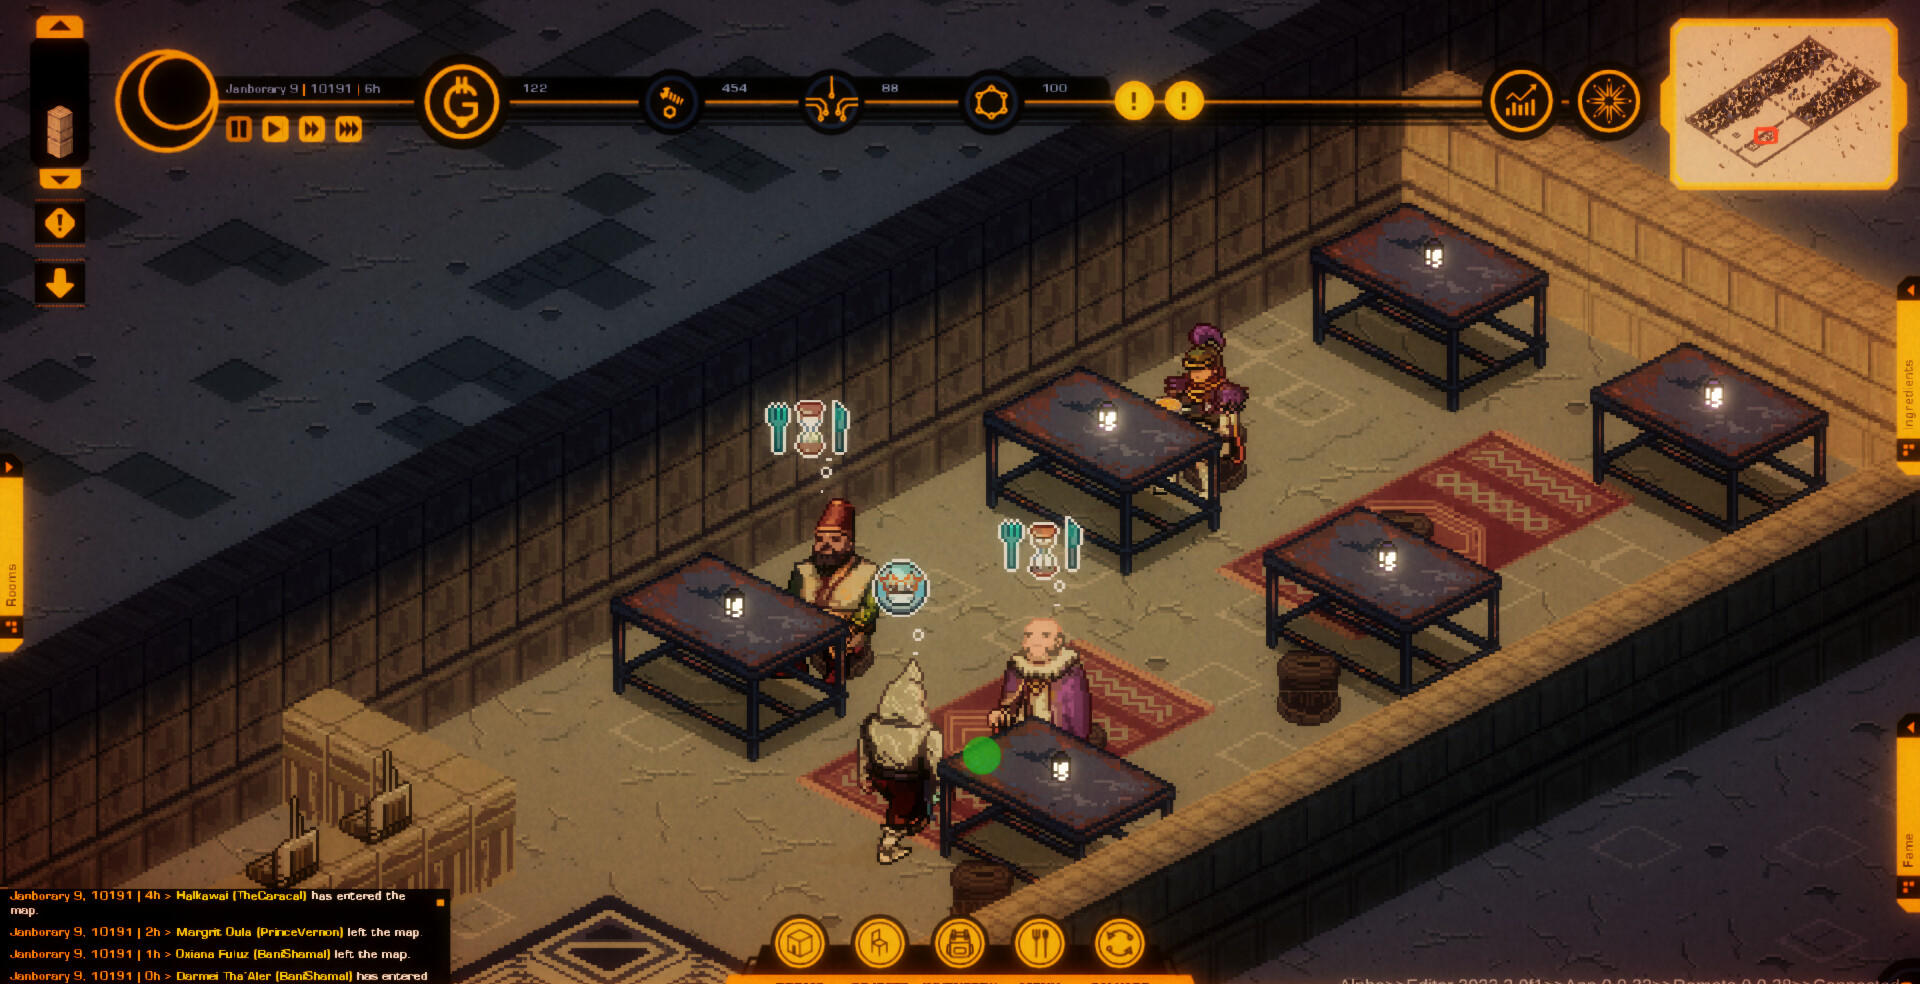 The Diner at the End of the Galaxy screenshot game